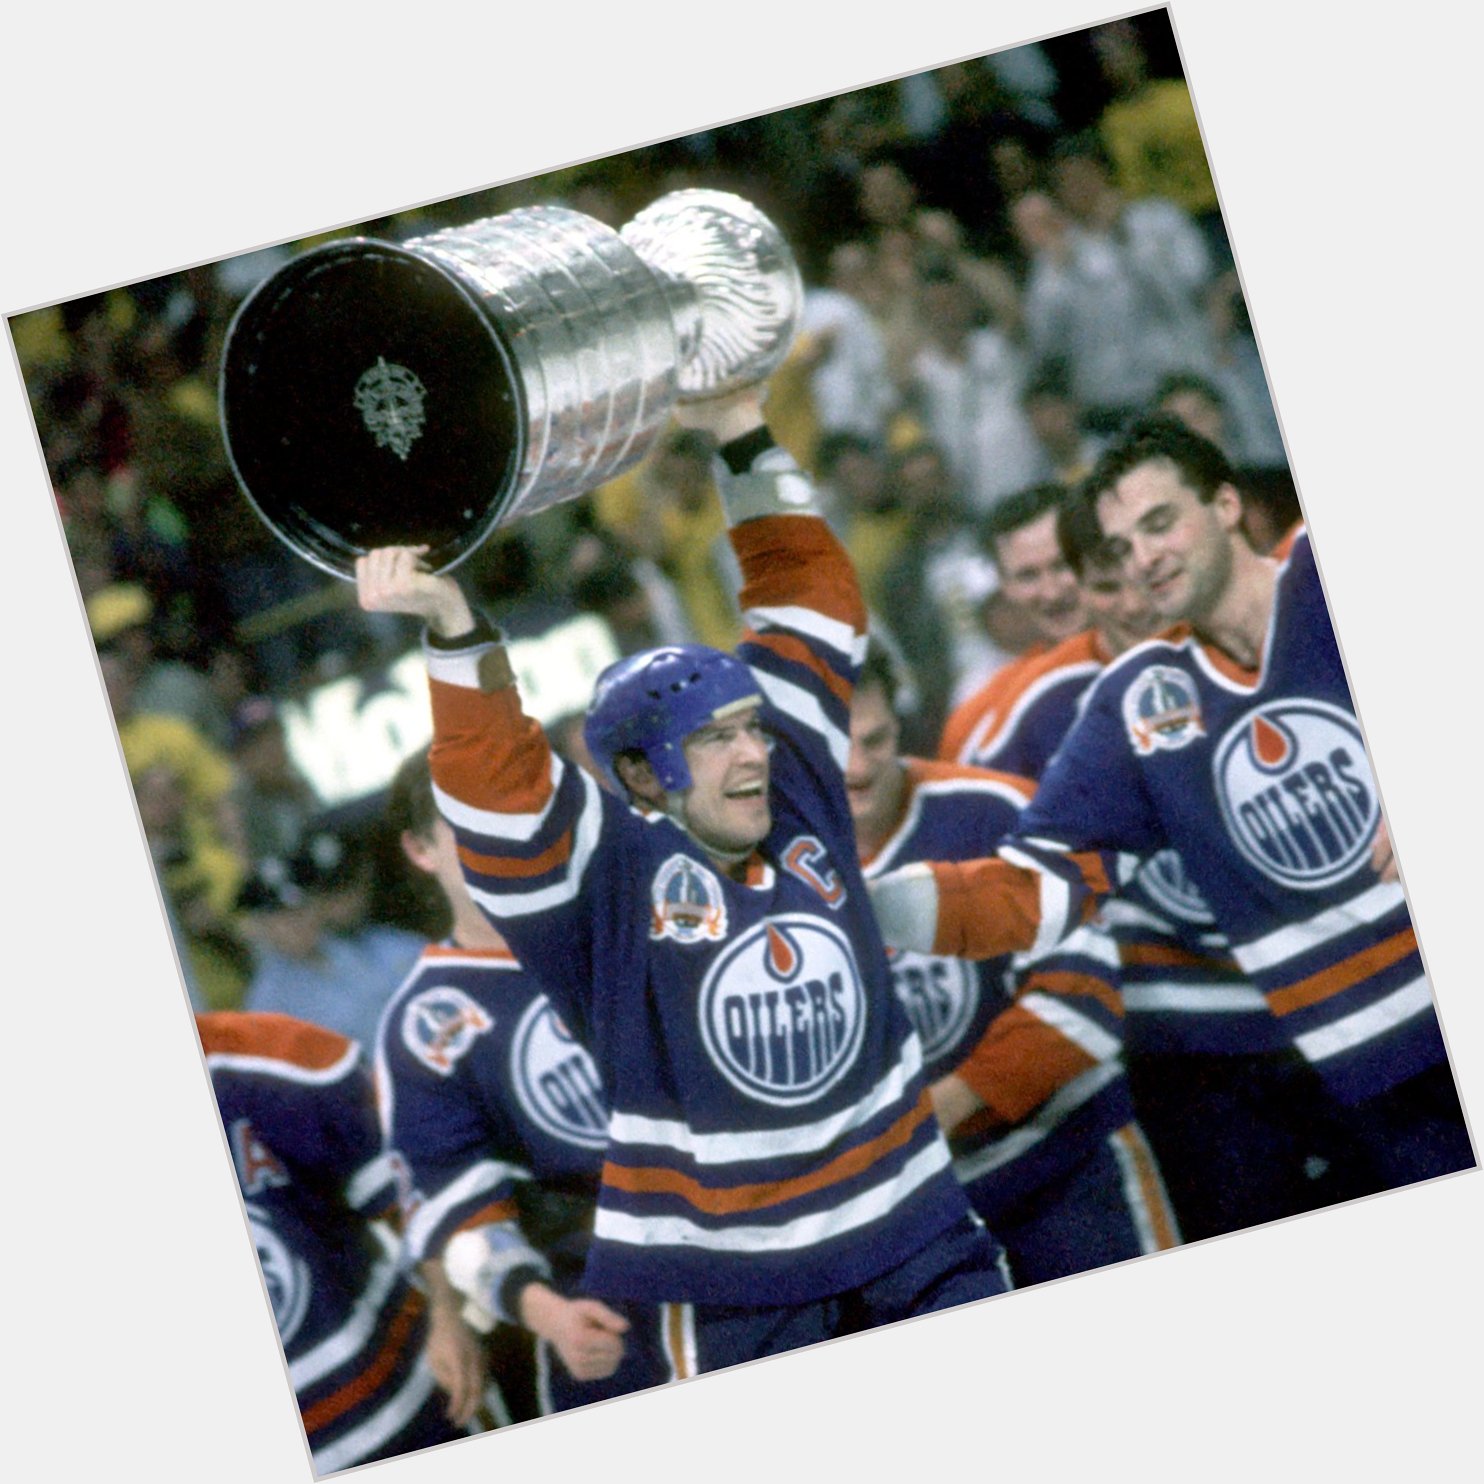 Happy 60th Birthday Mark Messier!

Hall of Famer
6X Stanley Cup Winner
2X Hart Trophy
5X All-star

What a legend! 